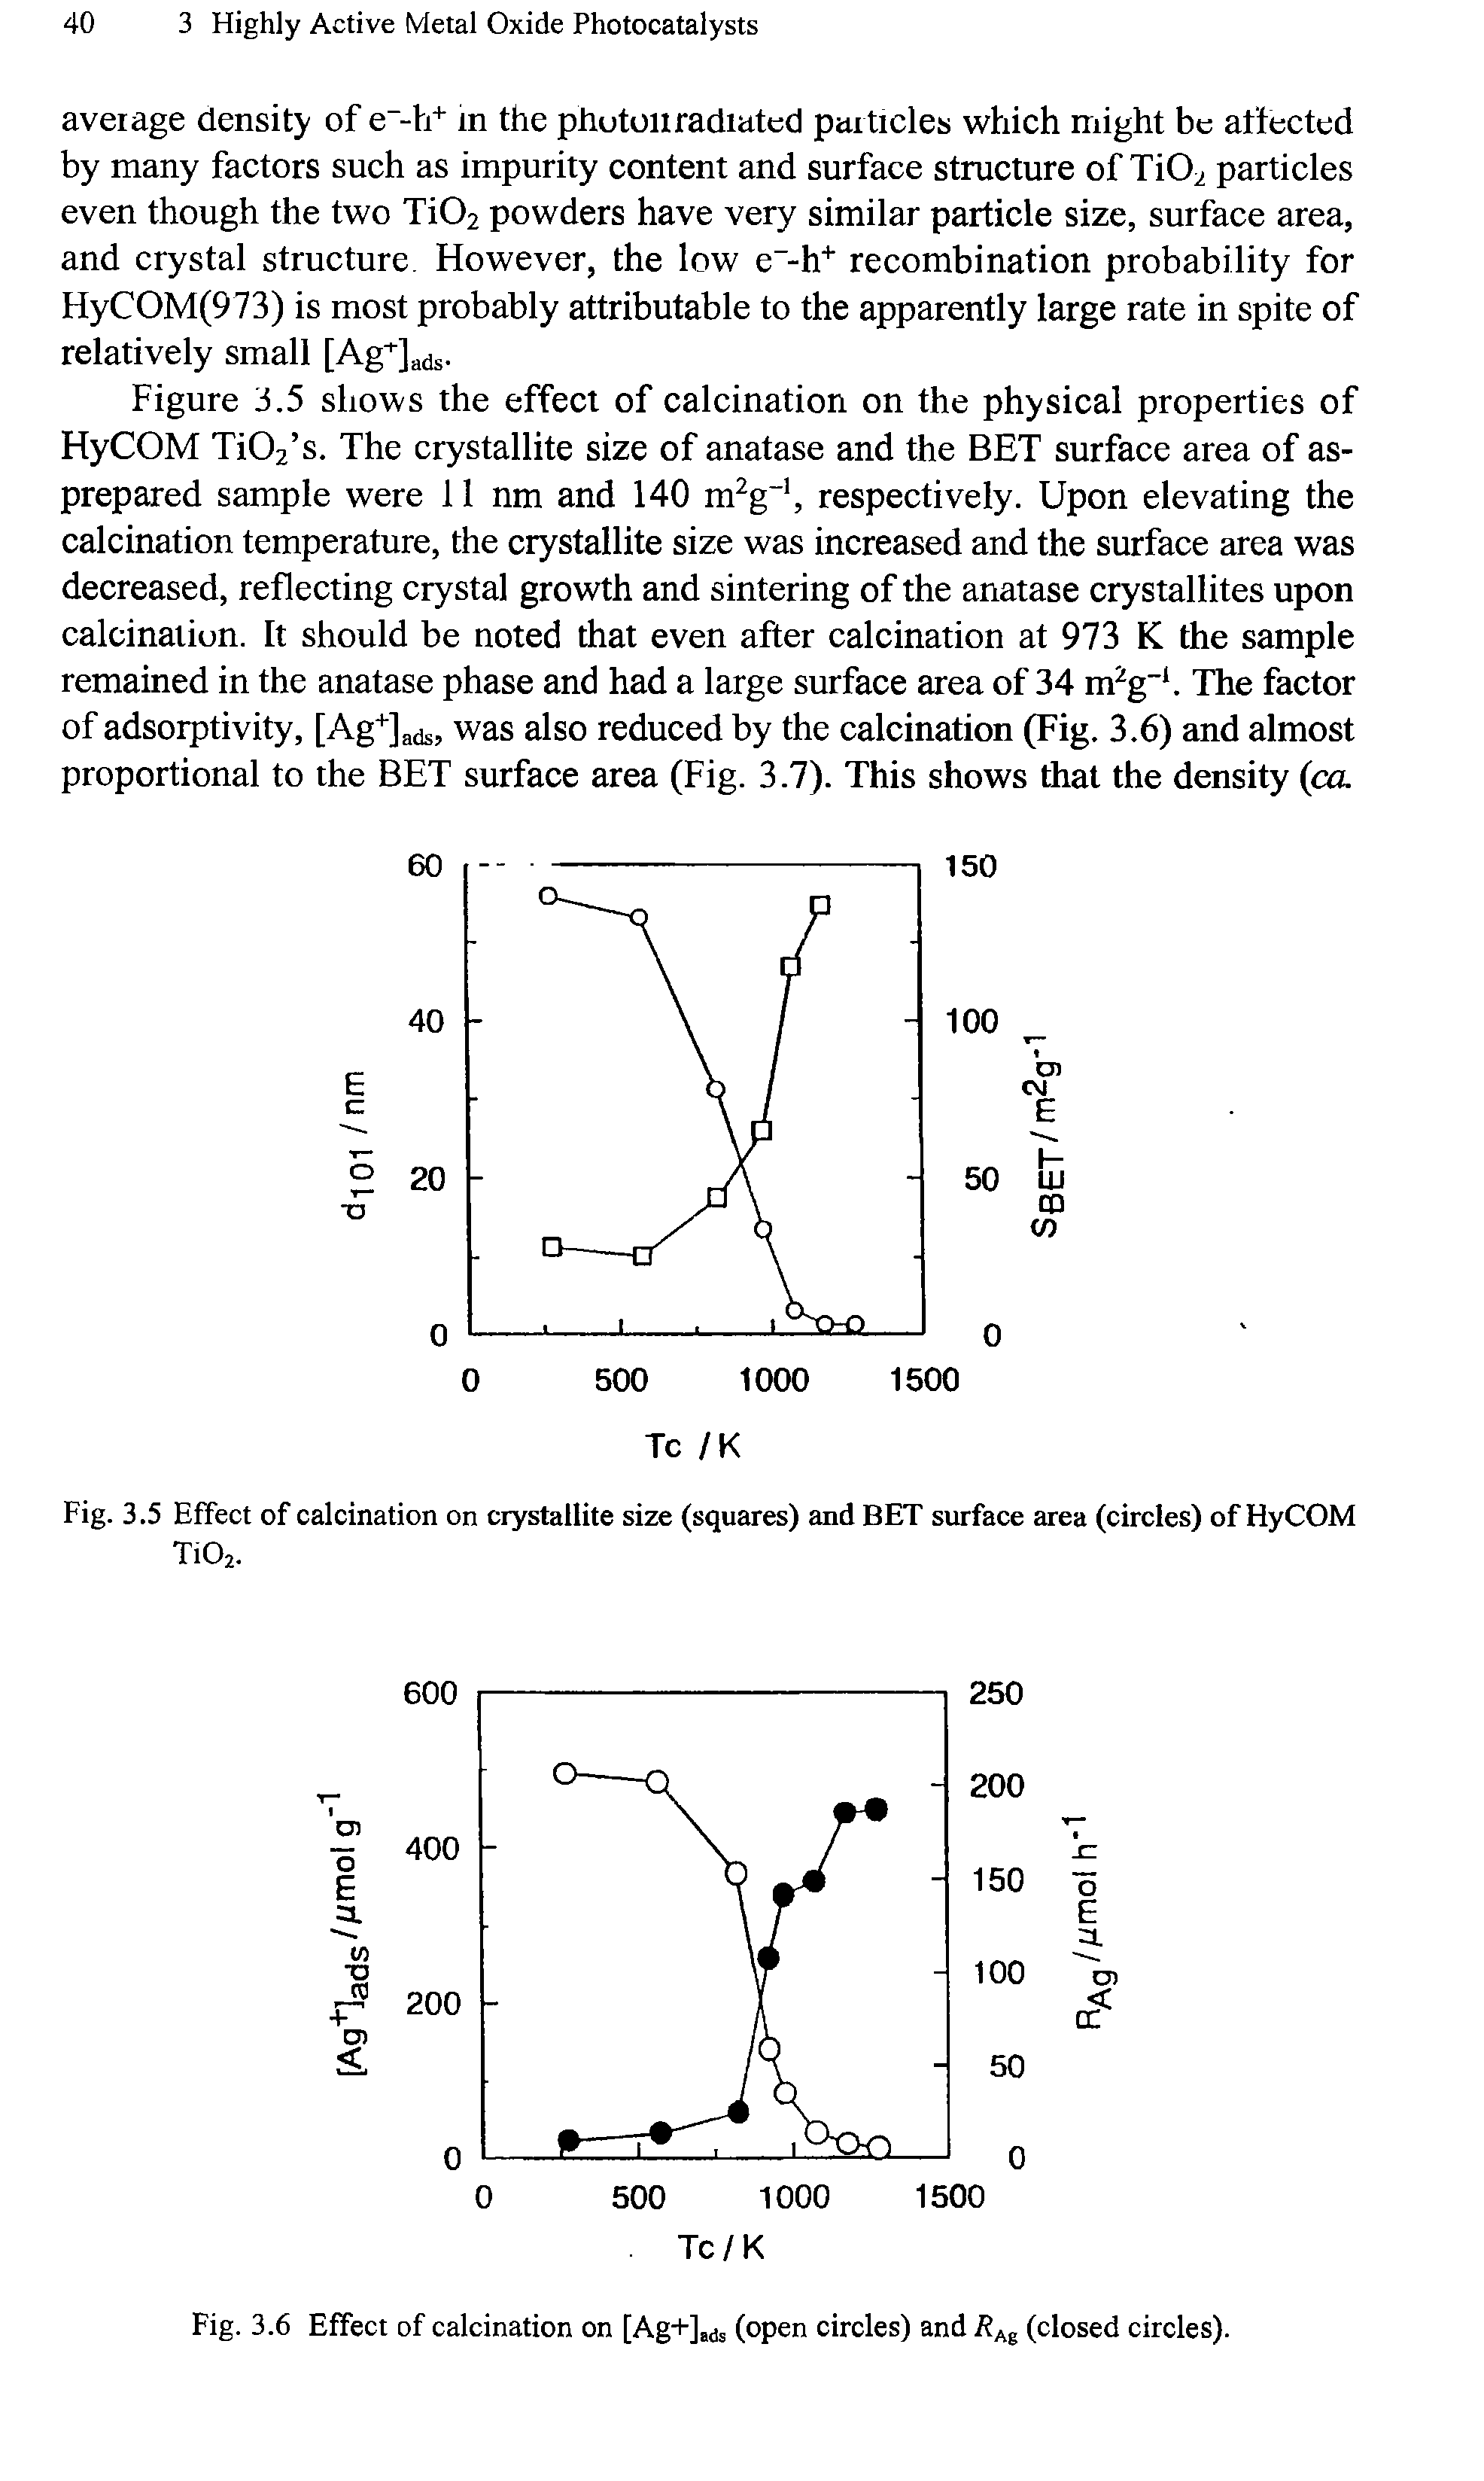 Figure 3.5 shows the effect of calcination on the physical properties of HyCOM TiOz s. The crystallite size of anatase and the BET surface area of as-prepared sample were 11 nm and 140 m2g-1, respectively. Upon elevating the calcination temperature, the crystallite size was increased and the surface area was decreased, reflecting crystal growth and sintering of the anatase crystallites upon calcination. It should be noted that even after calcination at 973 K the sample remained in the anatase phase and had a large surface area of 34 m2g-1. The factor of adsorptivity, [Ag+]ads, was also reduced by the calcination (Fig. 3.6) and almost proportional to the BET surface area (Fig. 3.7). This shows that the density (ca-...